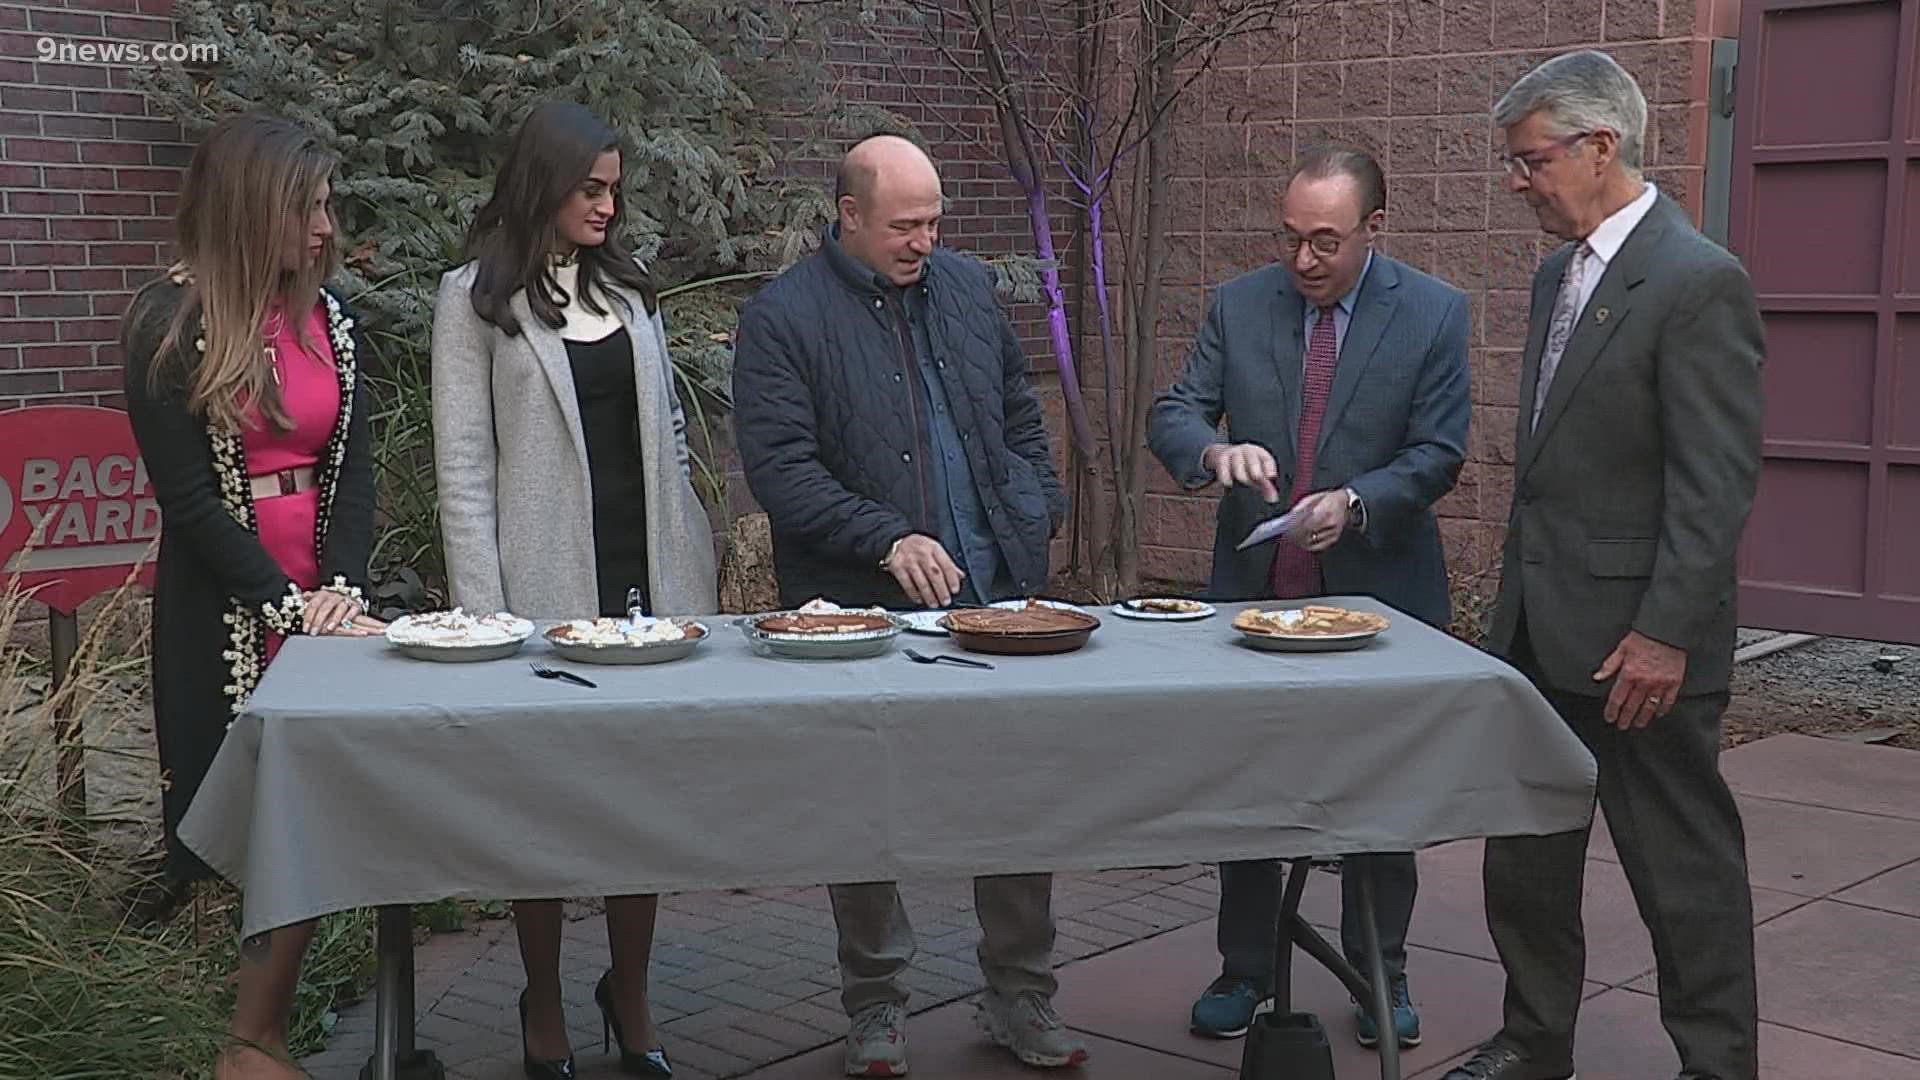 With less than 48 hours until Thanksgiving, the 9NEWS Mornings team is putting their pumpkin pies to the test.